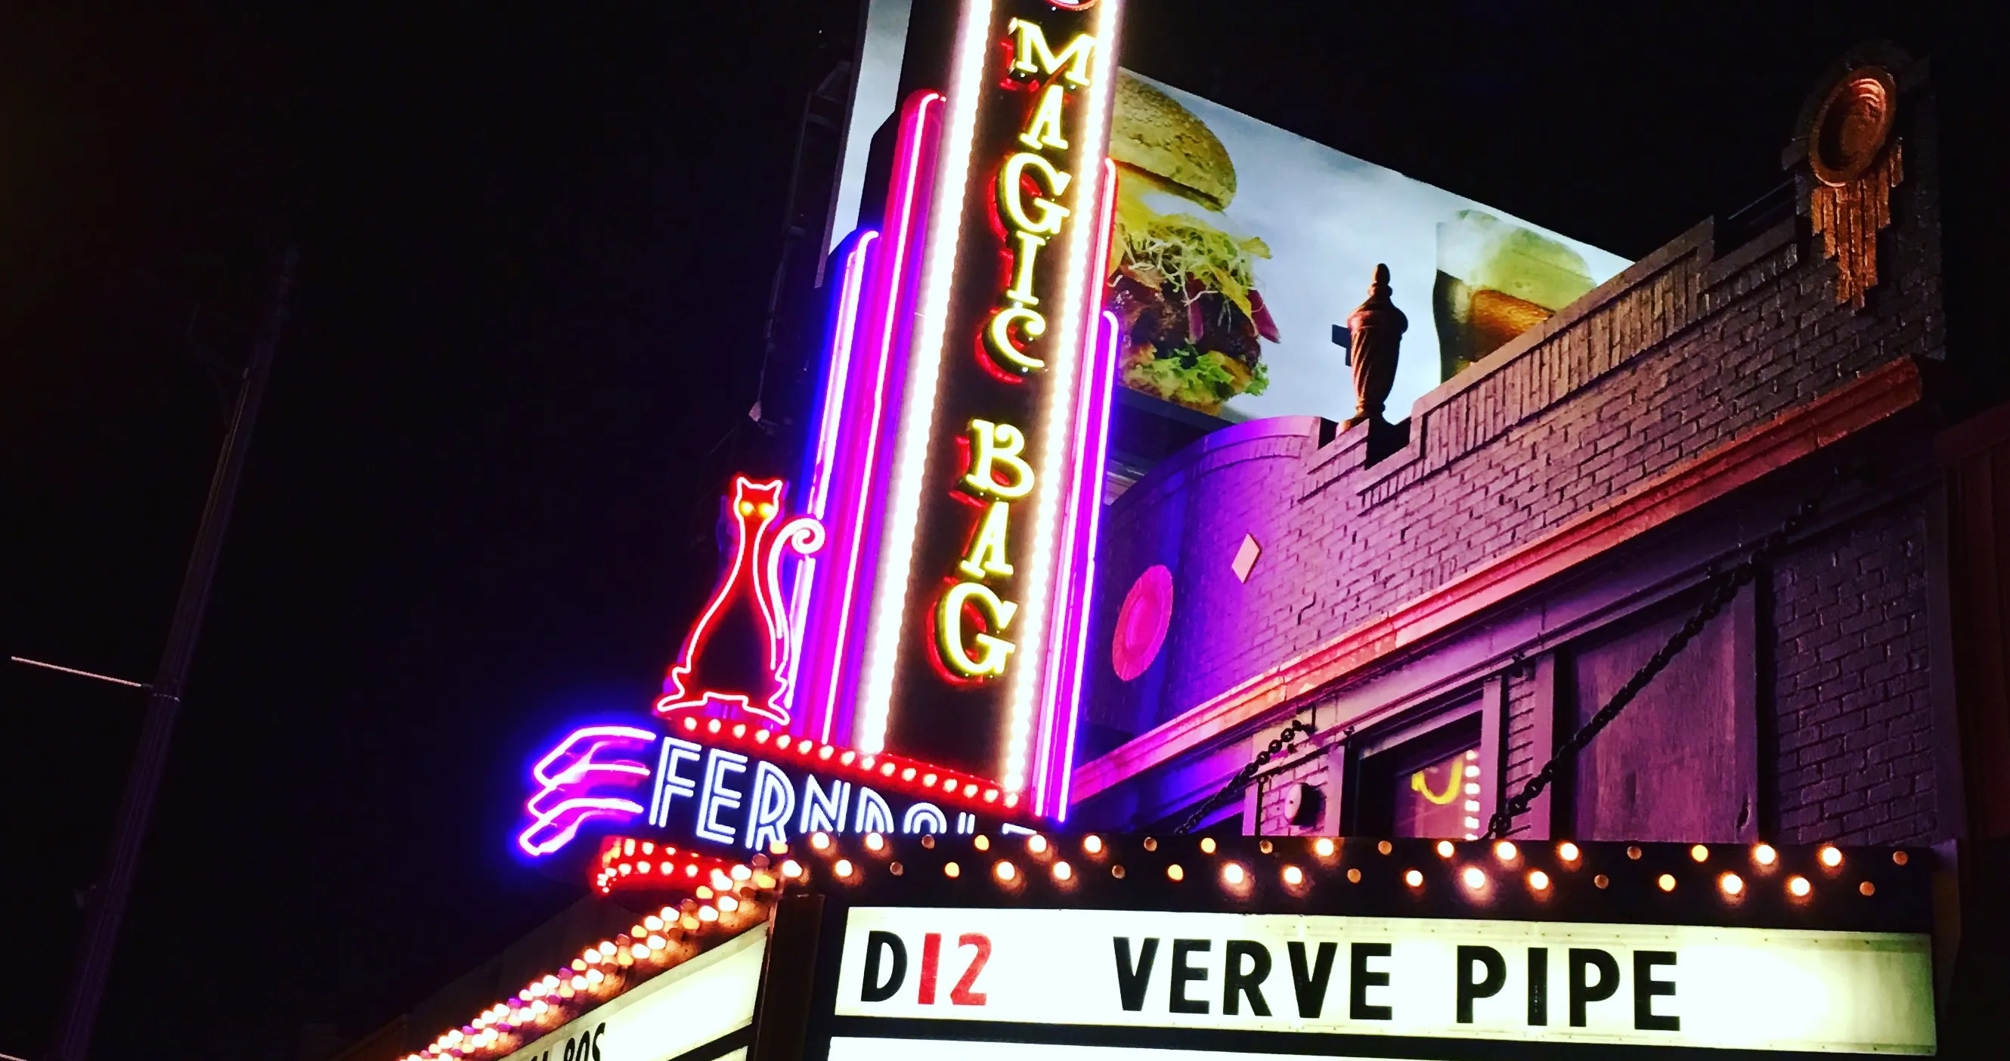 The Verve Pipe at the Magic Bag